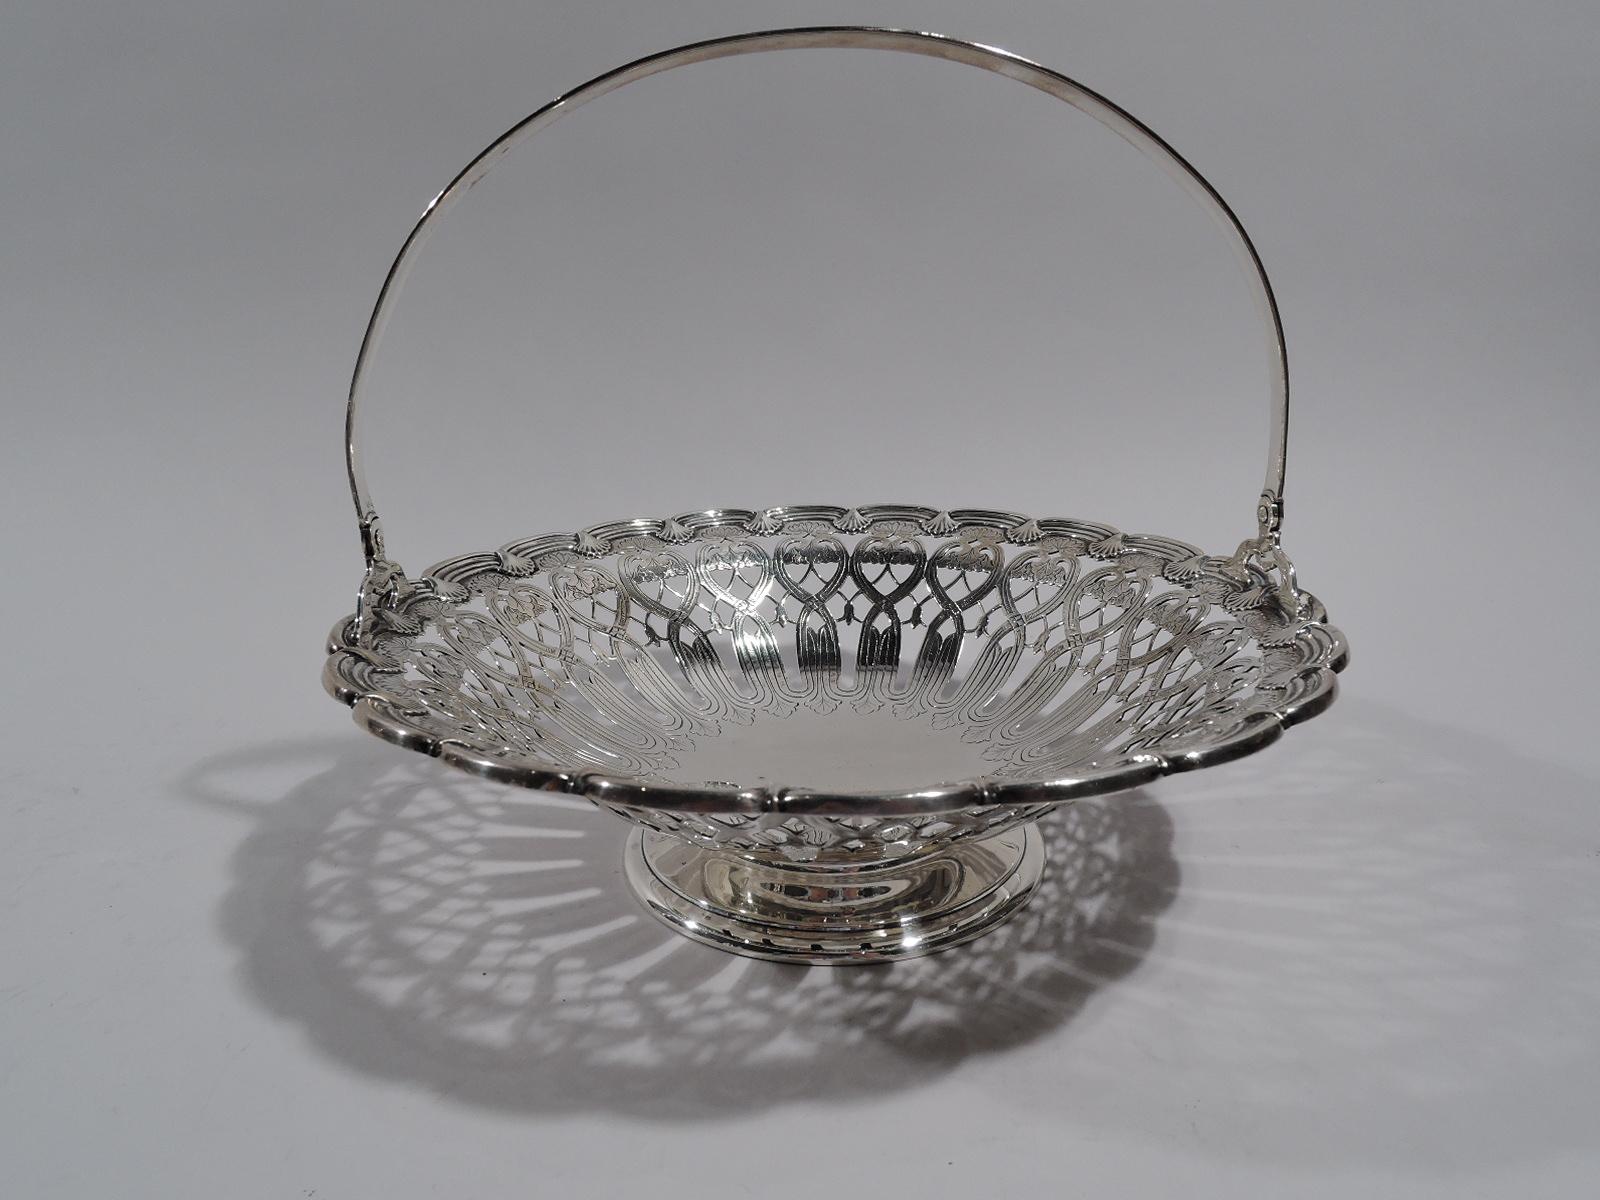 Edwardian Art Nouveau sterling silver basket. Made by Tiffany & Co. in New York, circa 1907. Solid well with engraved leaves. Open sides with interlaced scroll-and-leaf pattern heightened with engraving. Rim has molded c-scrolls interspersed with